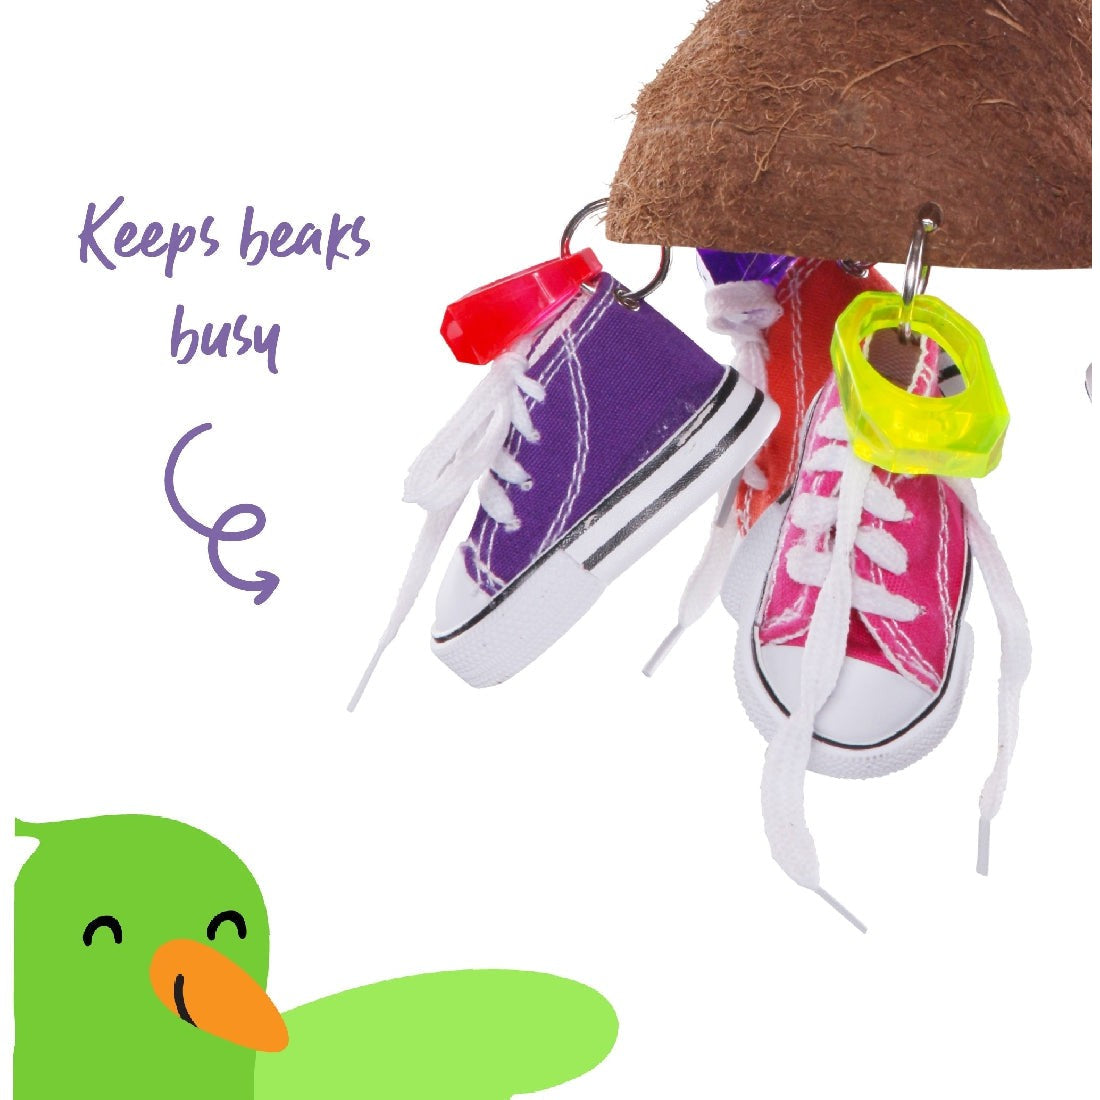 Alt text: Bird toy with colorful sneaker shapes hanging from coconut shell.